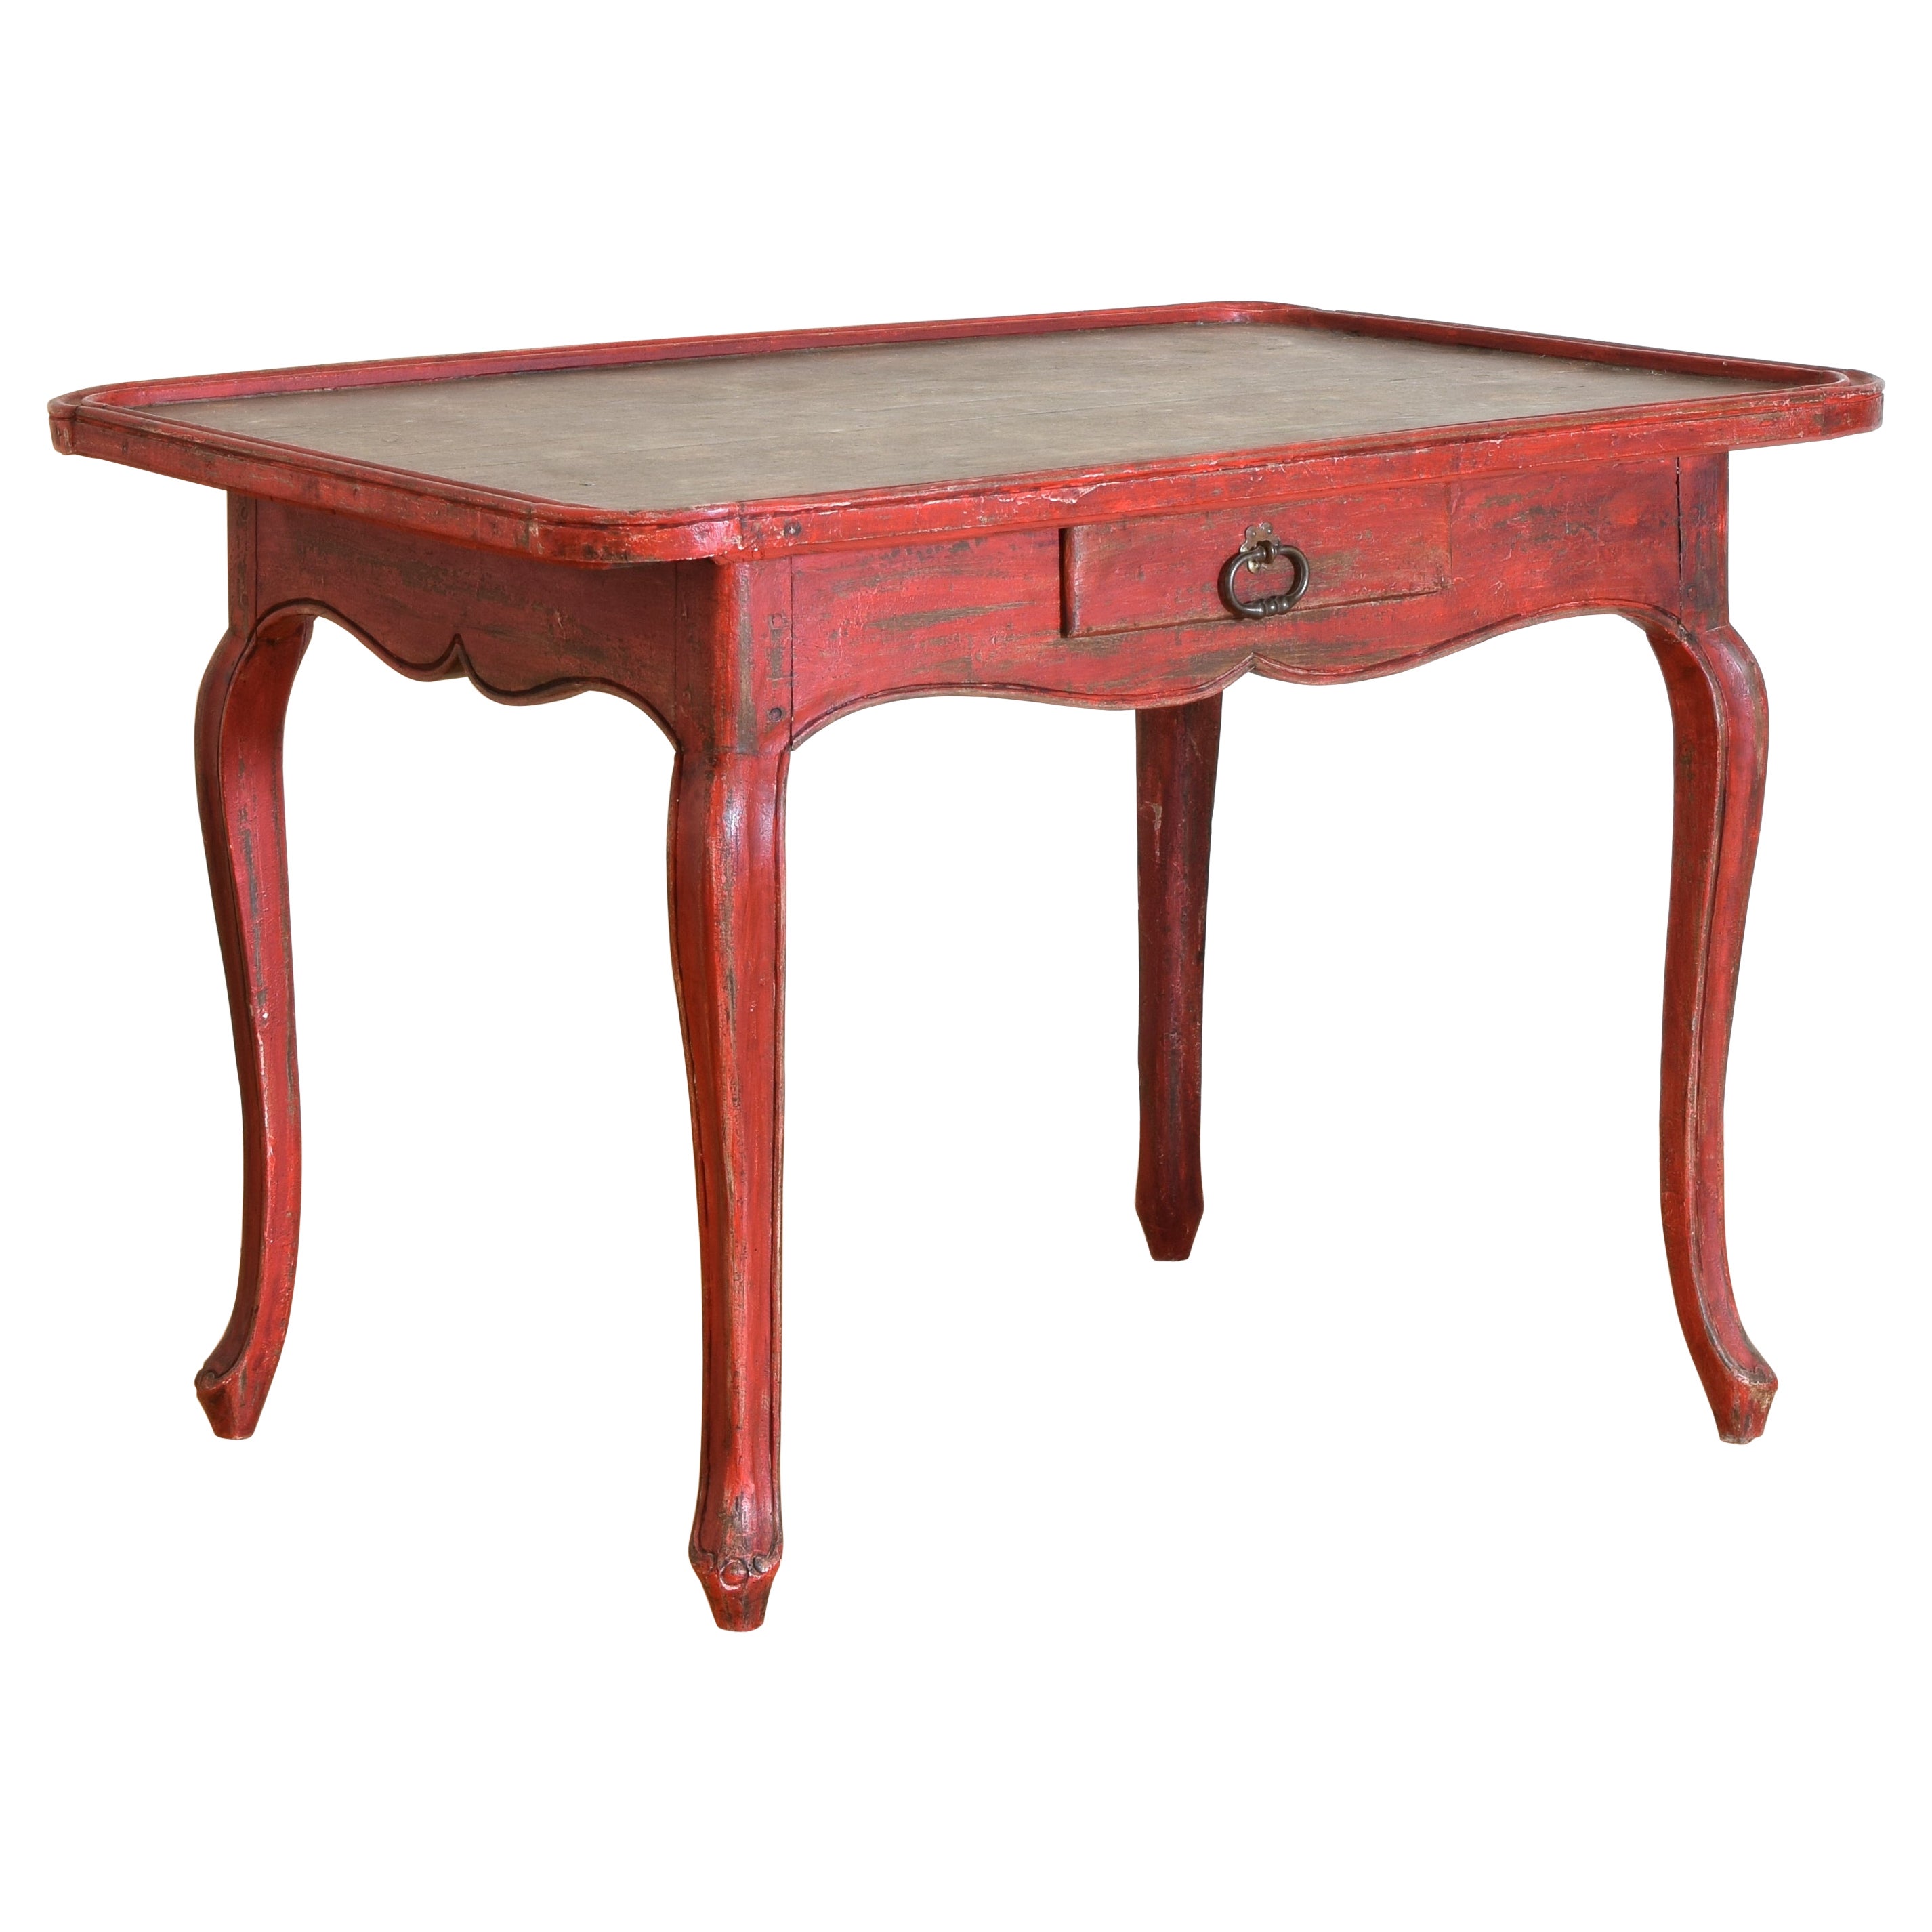 French Louis XV Period Shape & Red Painted Walnut 1-Drawer Table, mid 18th cen. For Sale